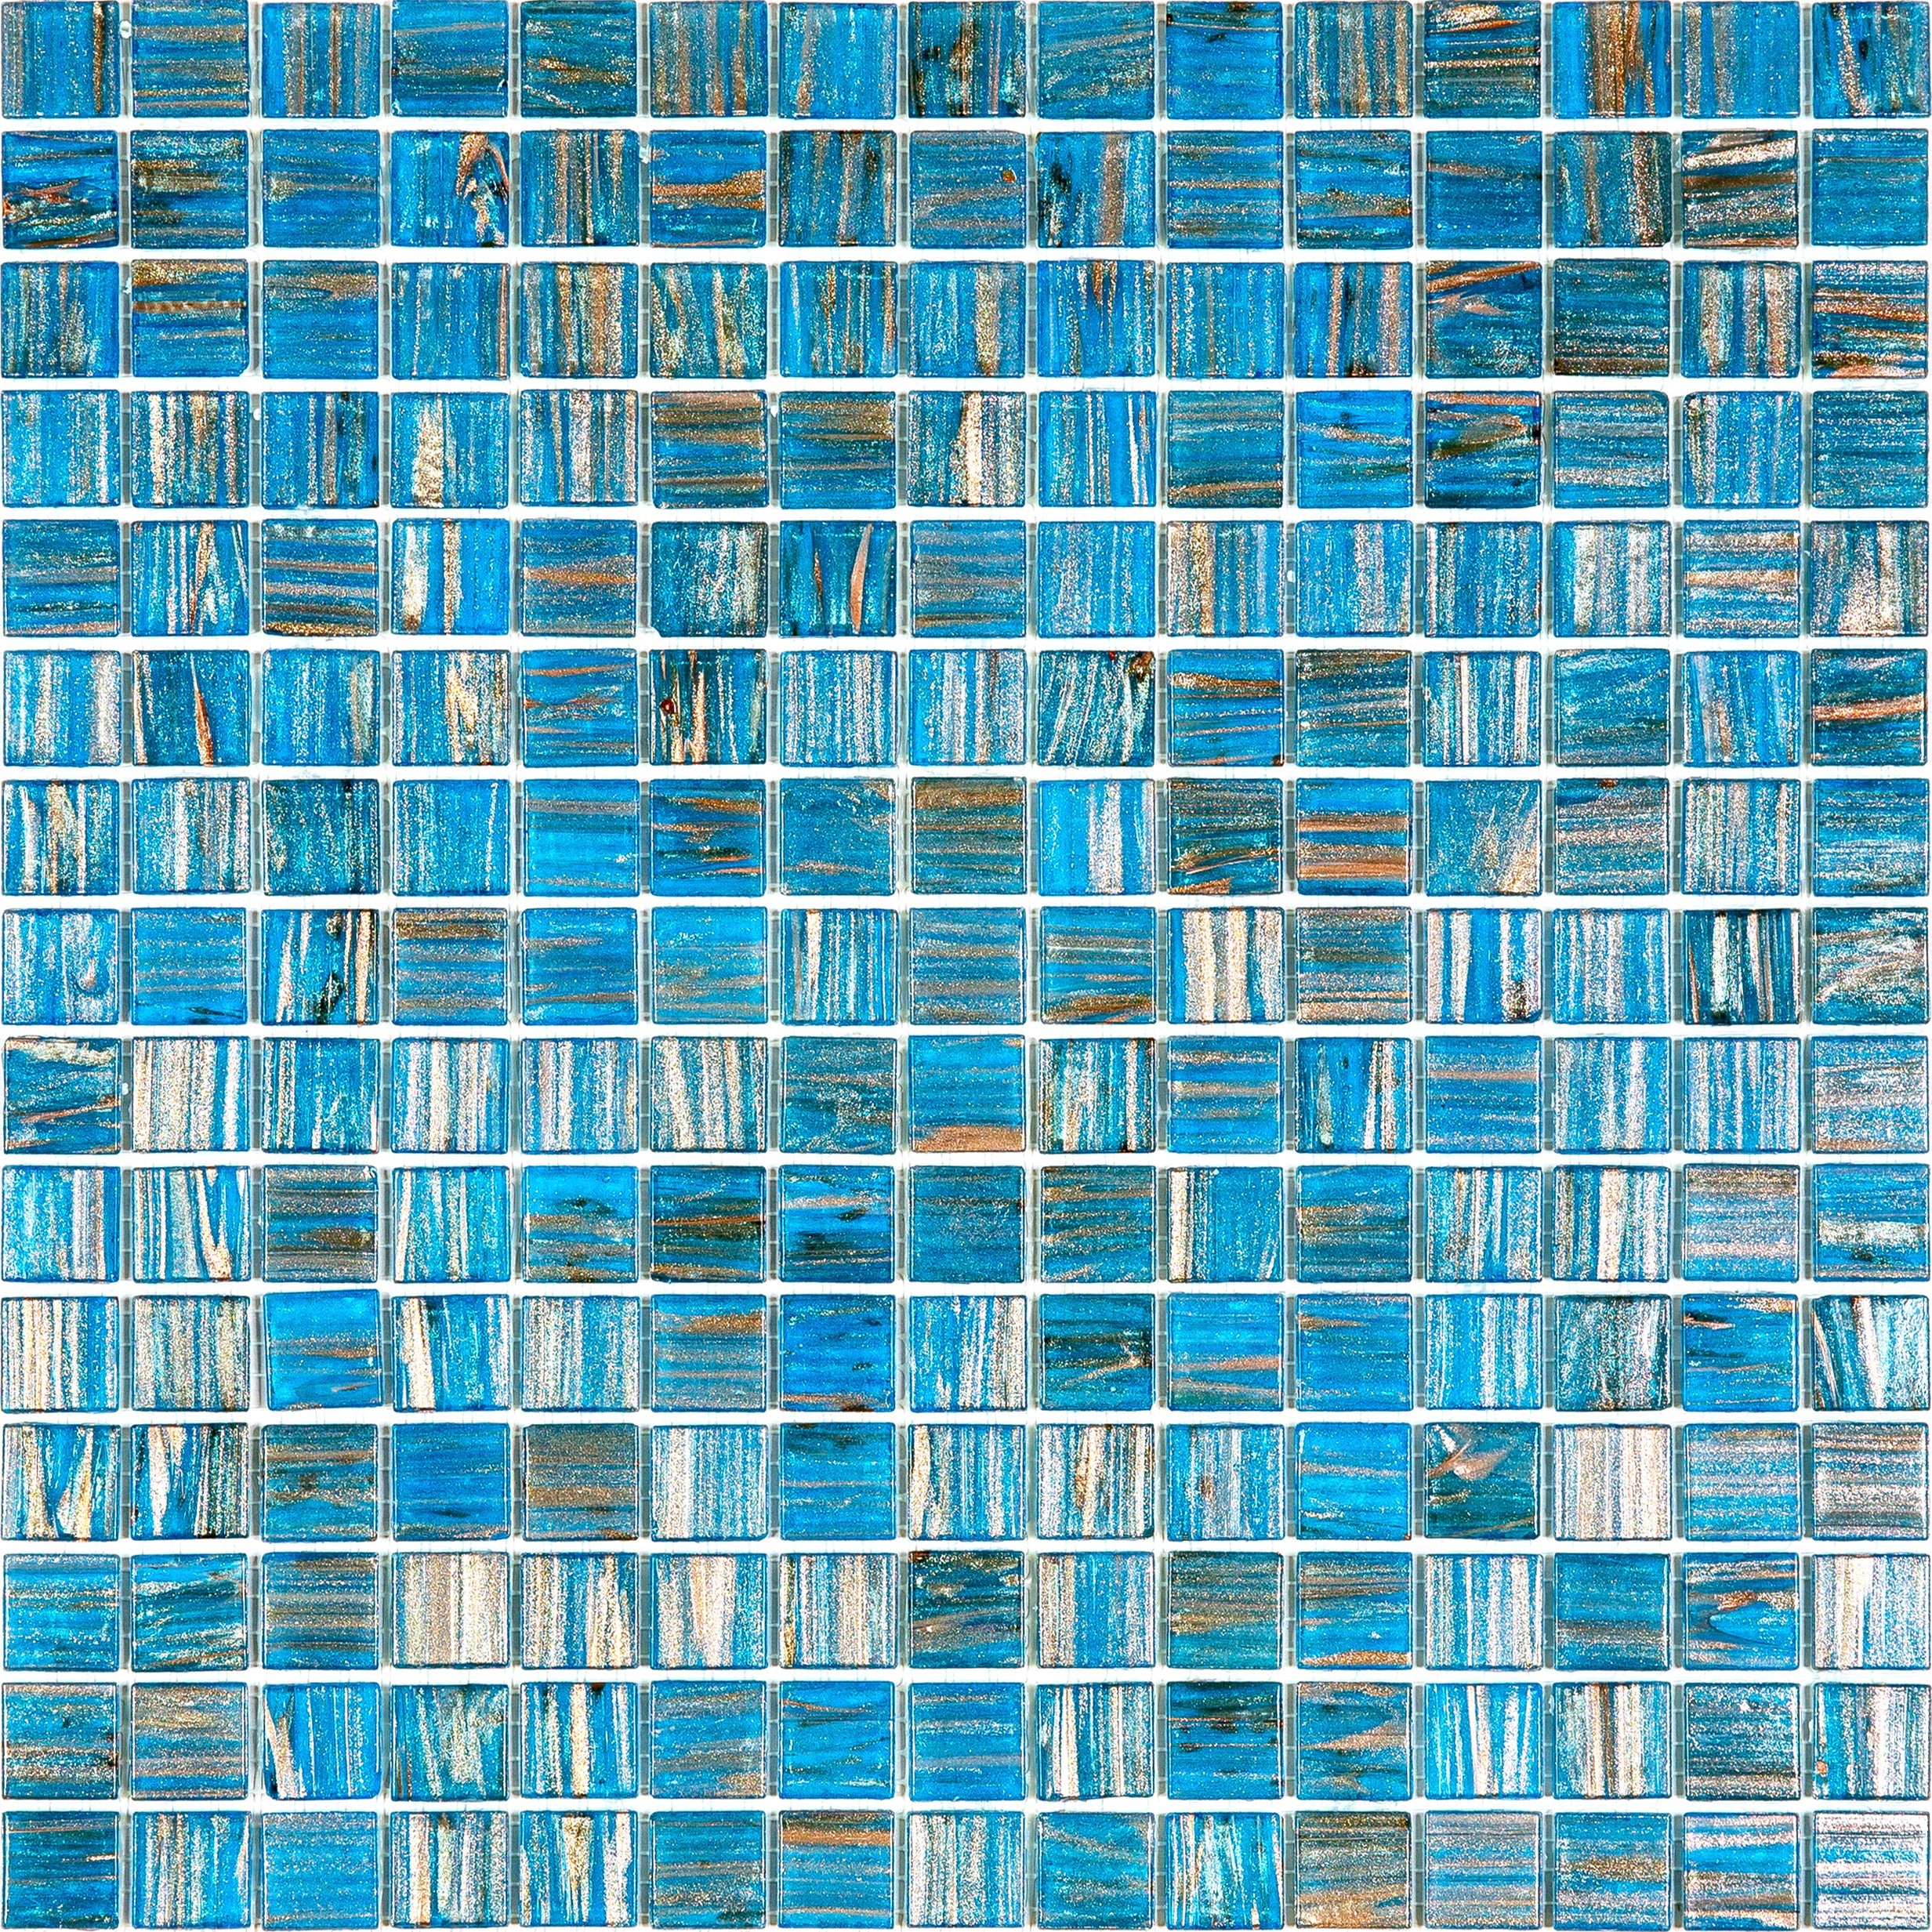 mir alma solid colors 0_8 inch stella ste169 wall and floor mosaic distributed by surface group natural materials